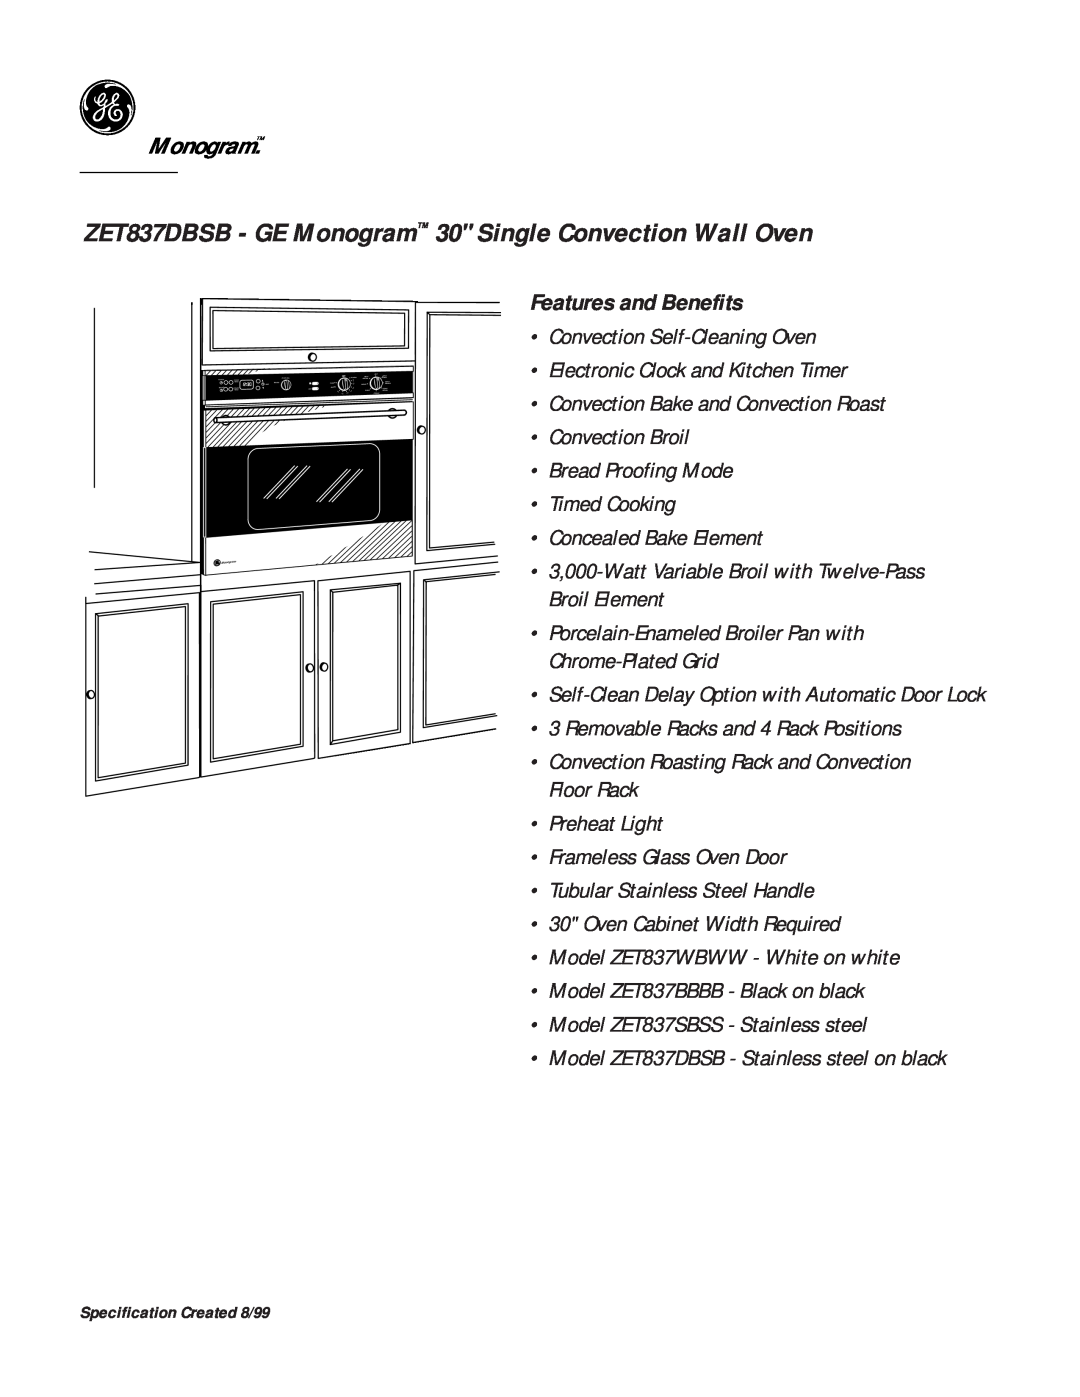 GE Monogram dimensions Features and Benefits, ZET837DBSB - GE Monogram 30 Single Convection Wall Oven 